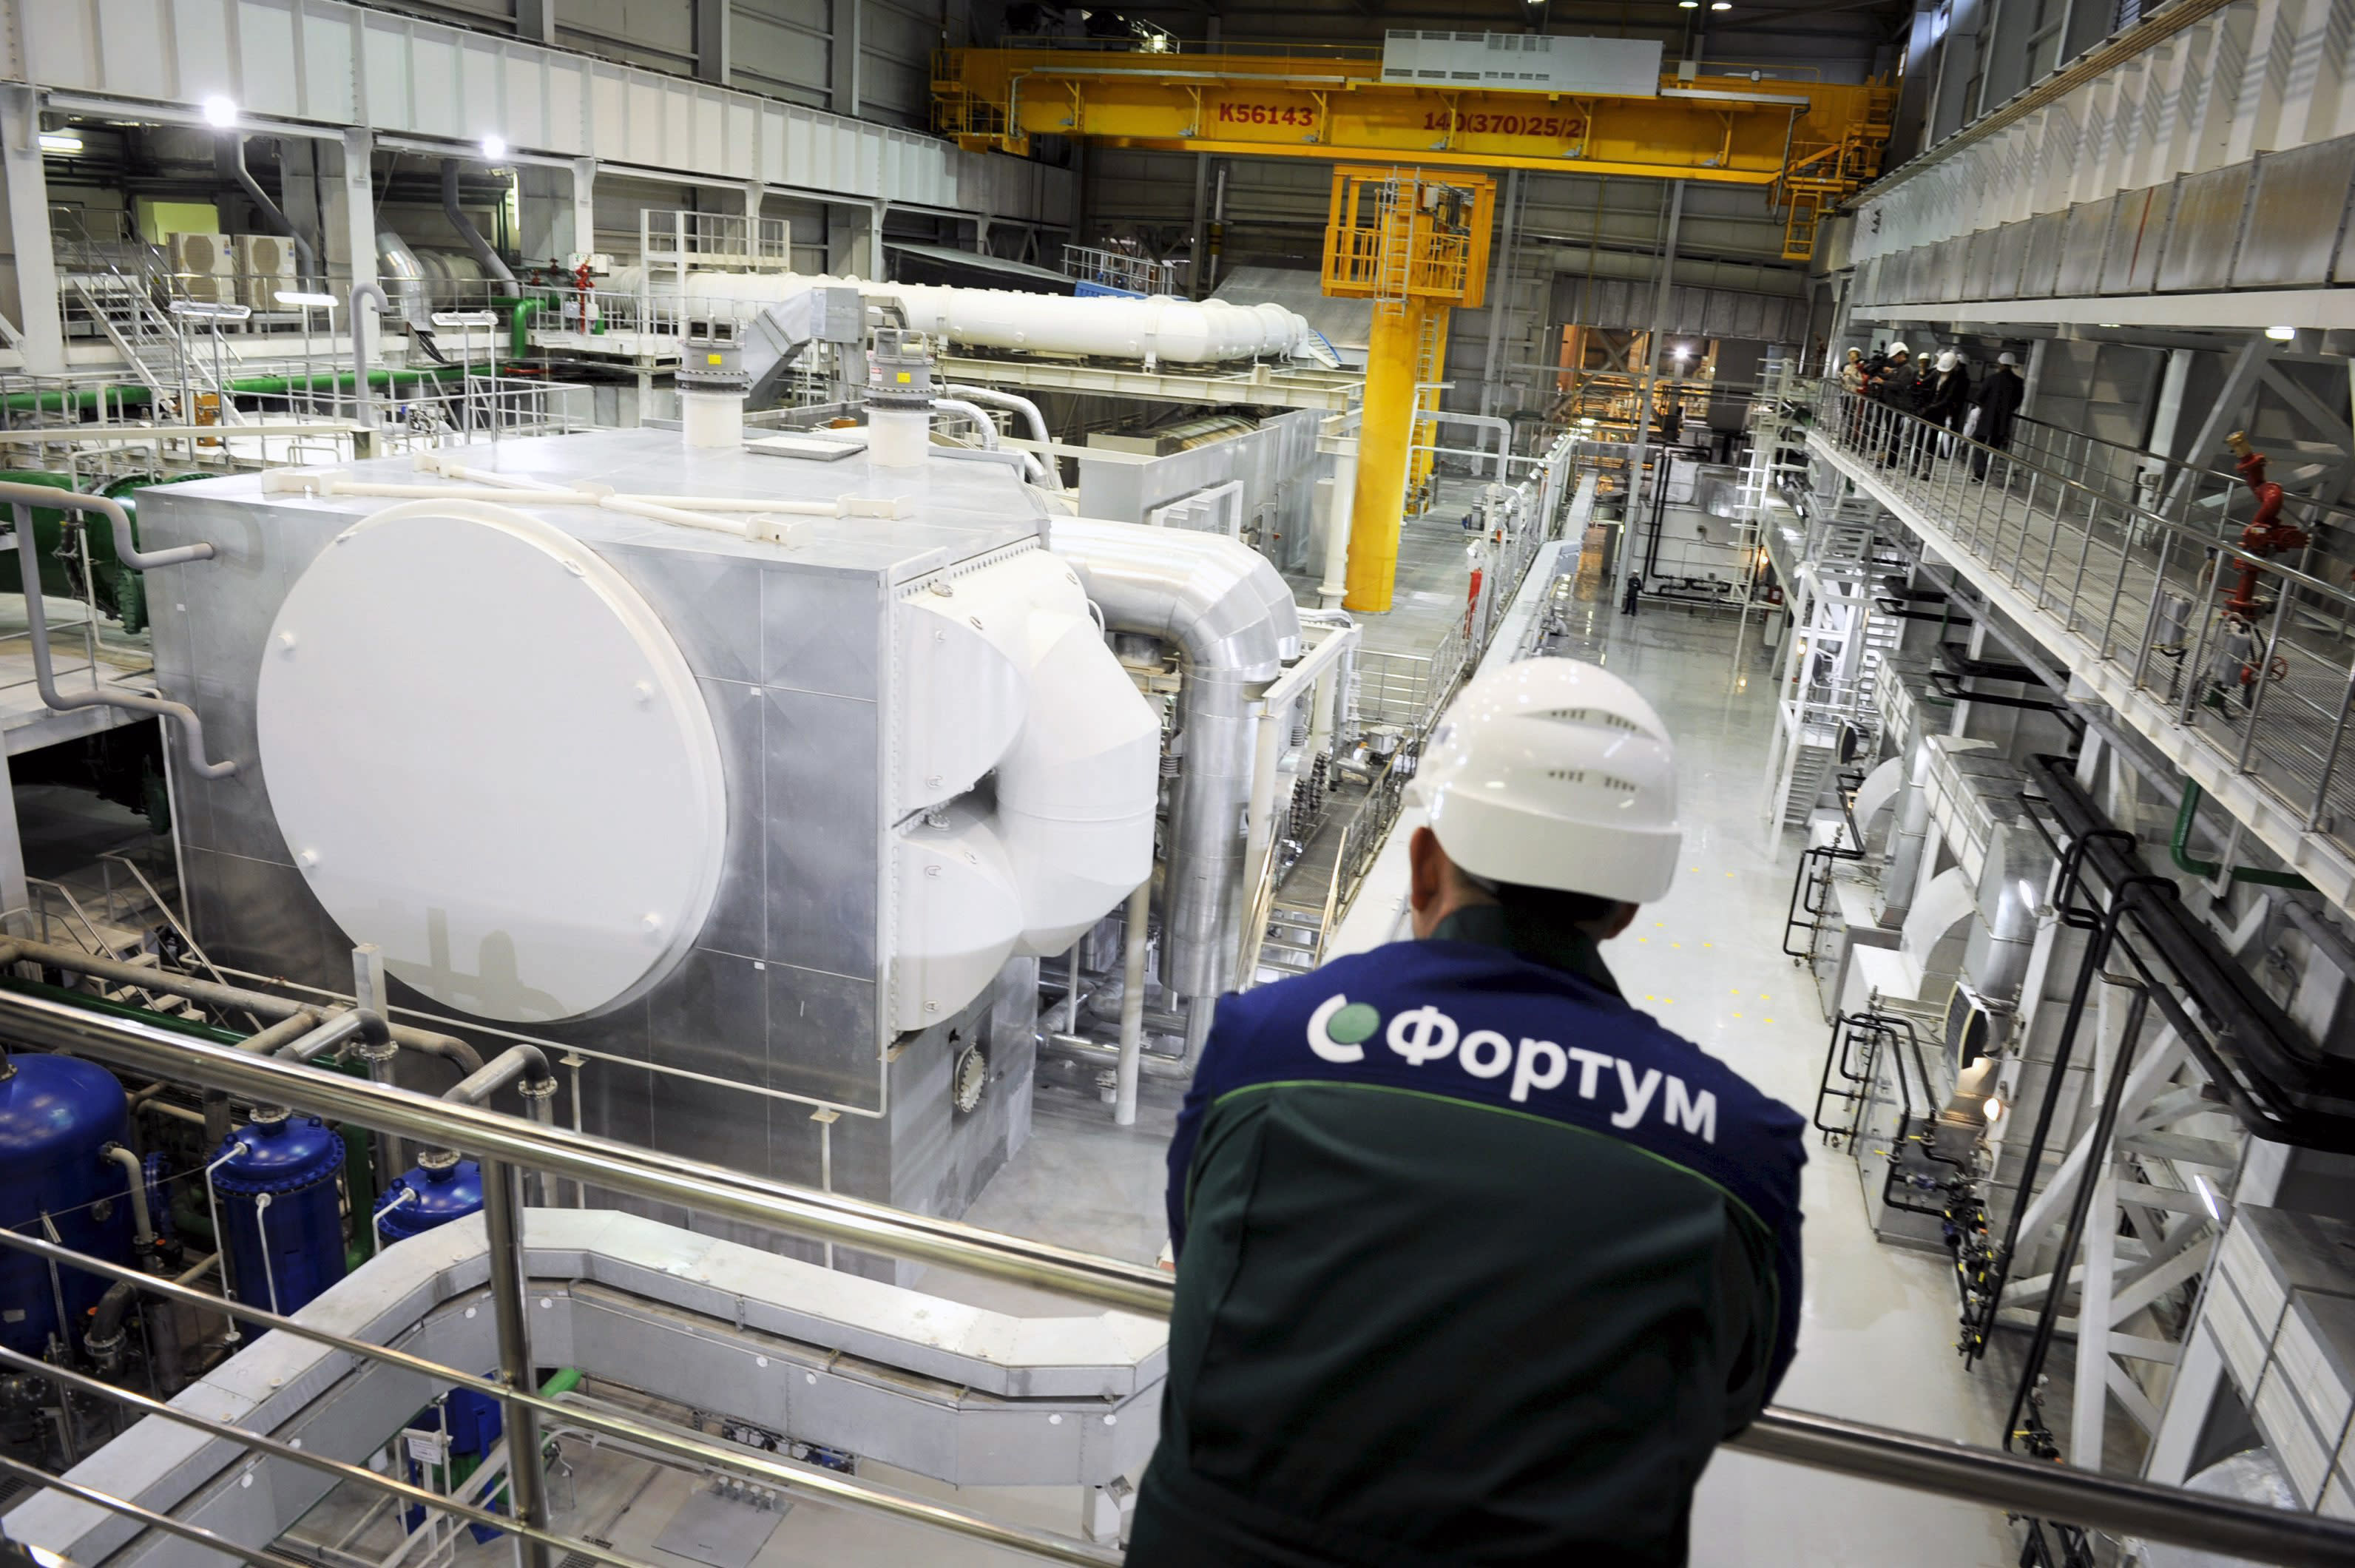 Fortum officially opposes the confiscation of Russian assets